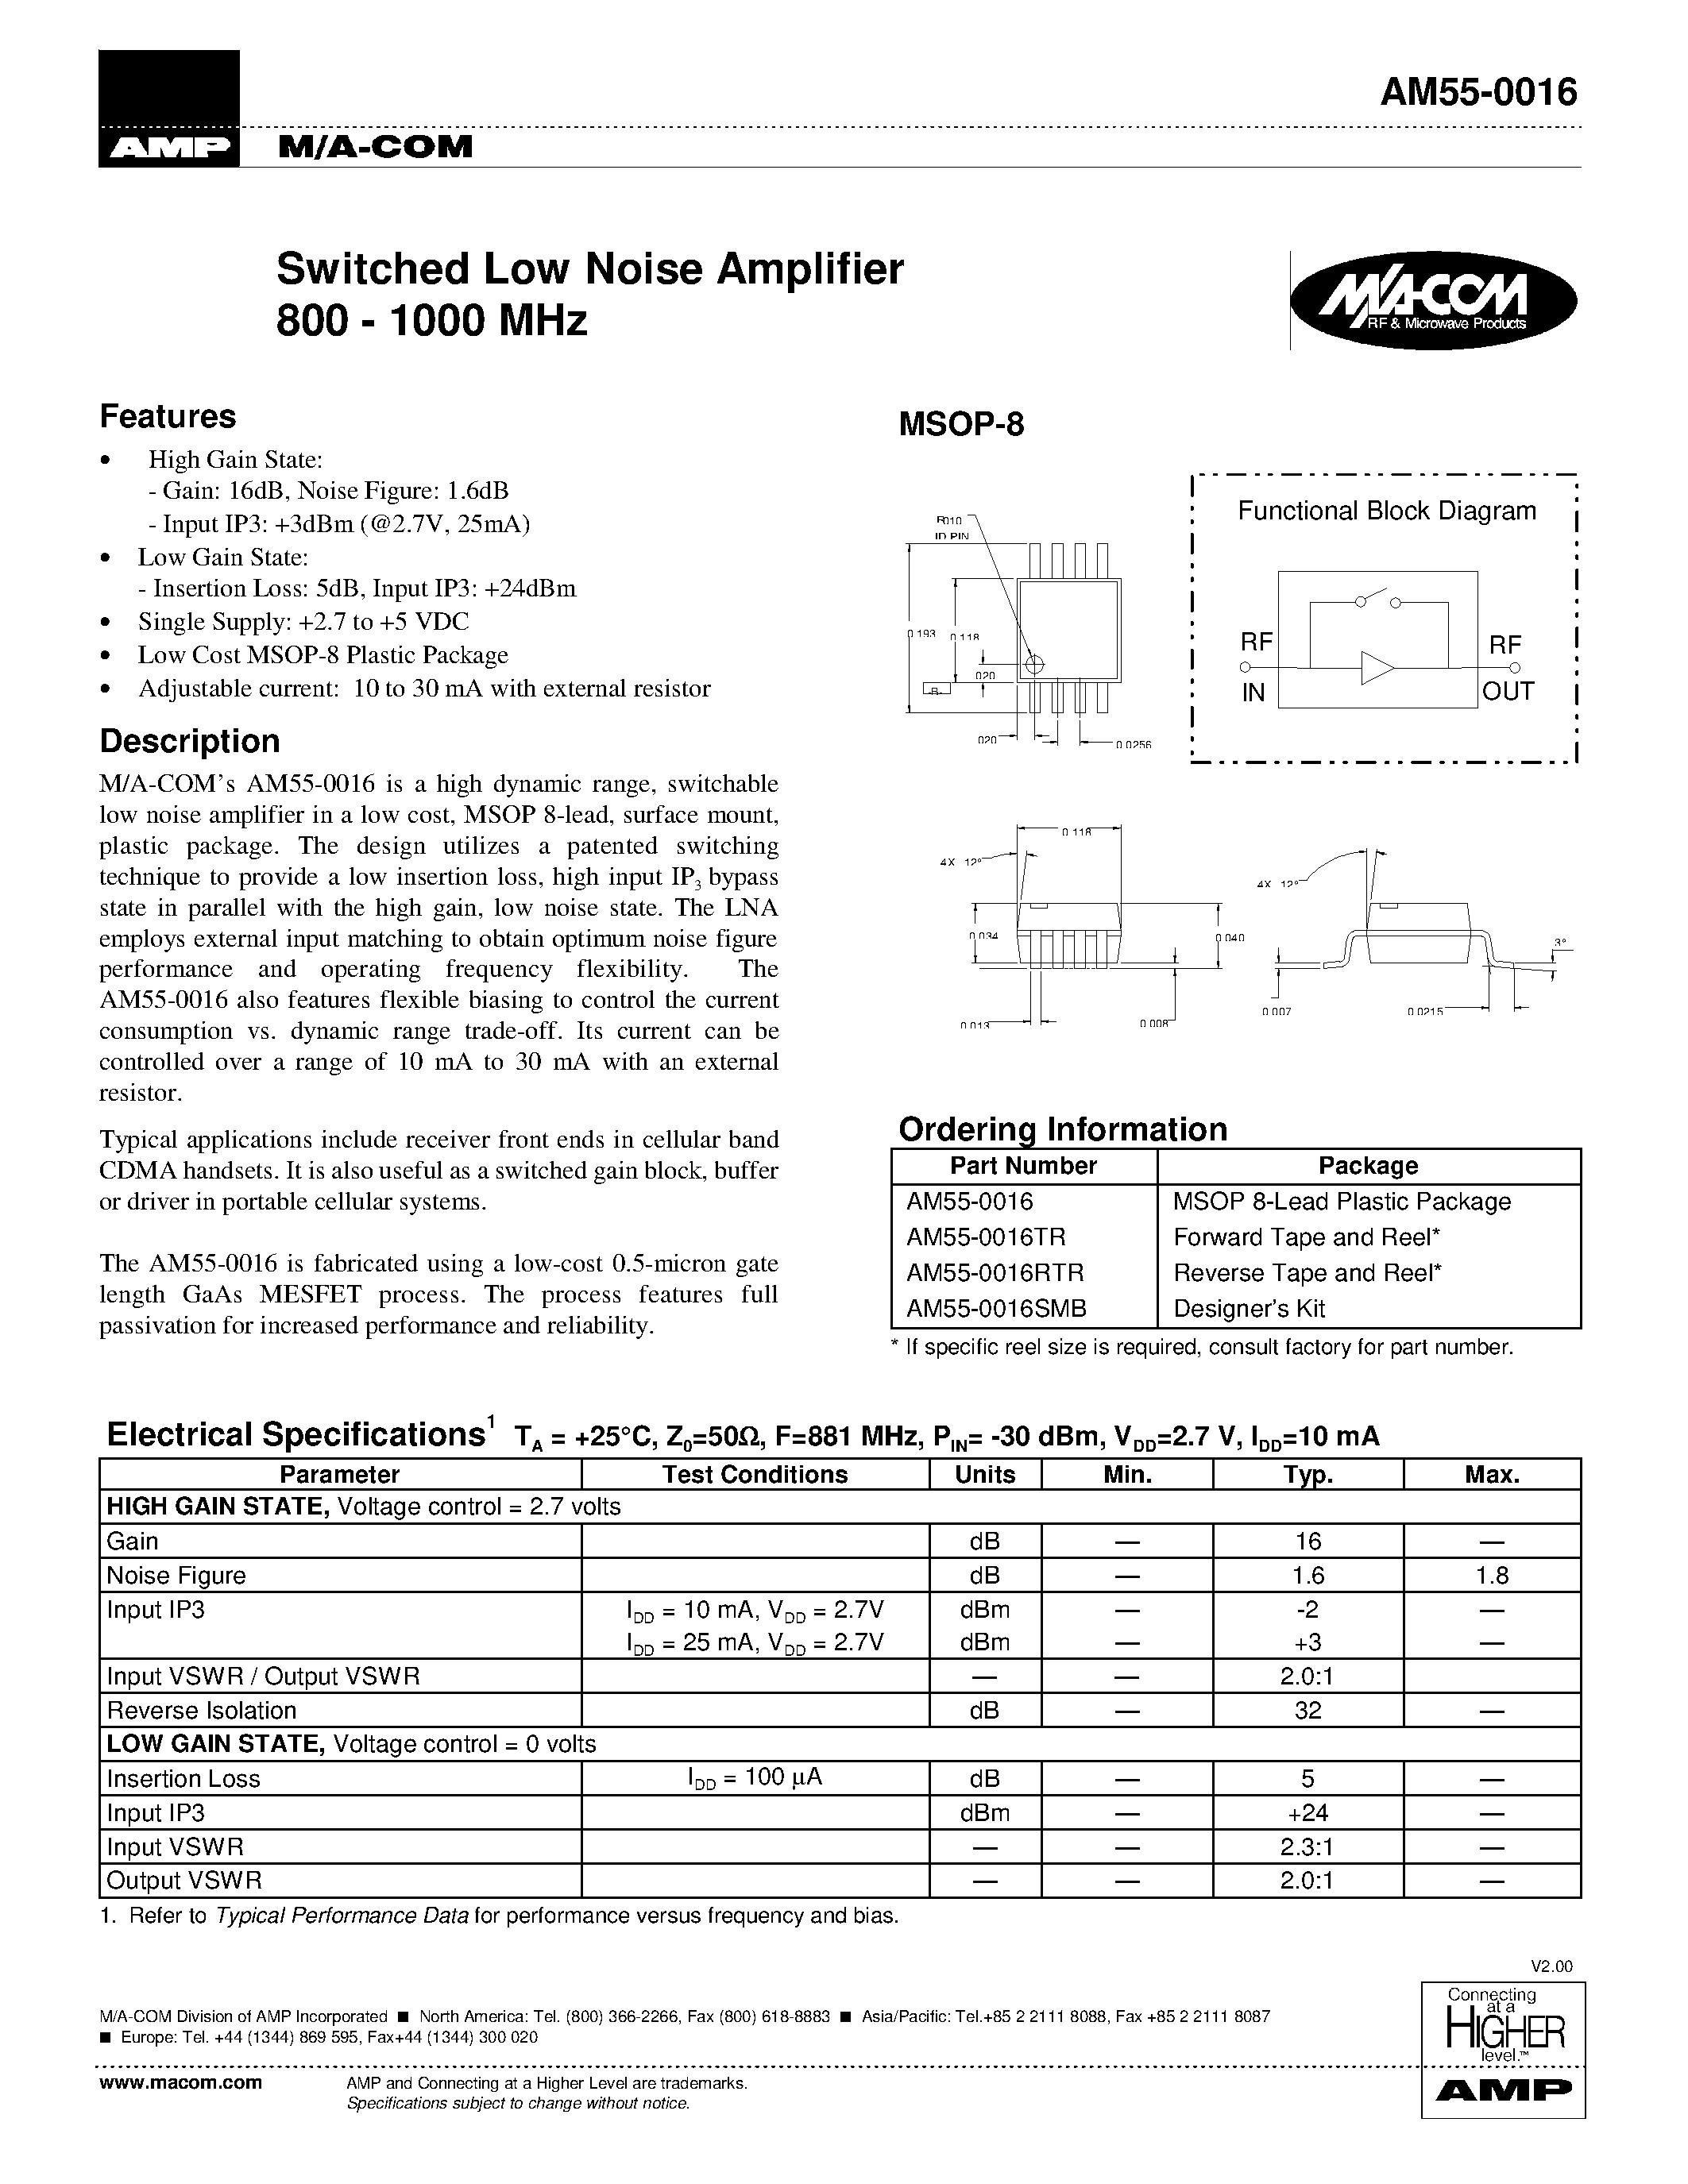 Datasheet AM55-0016 - Switched Low Noise Amplifier 800 - 1000 MHz page 1